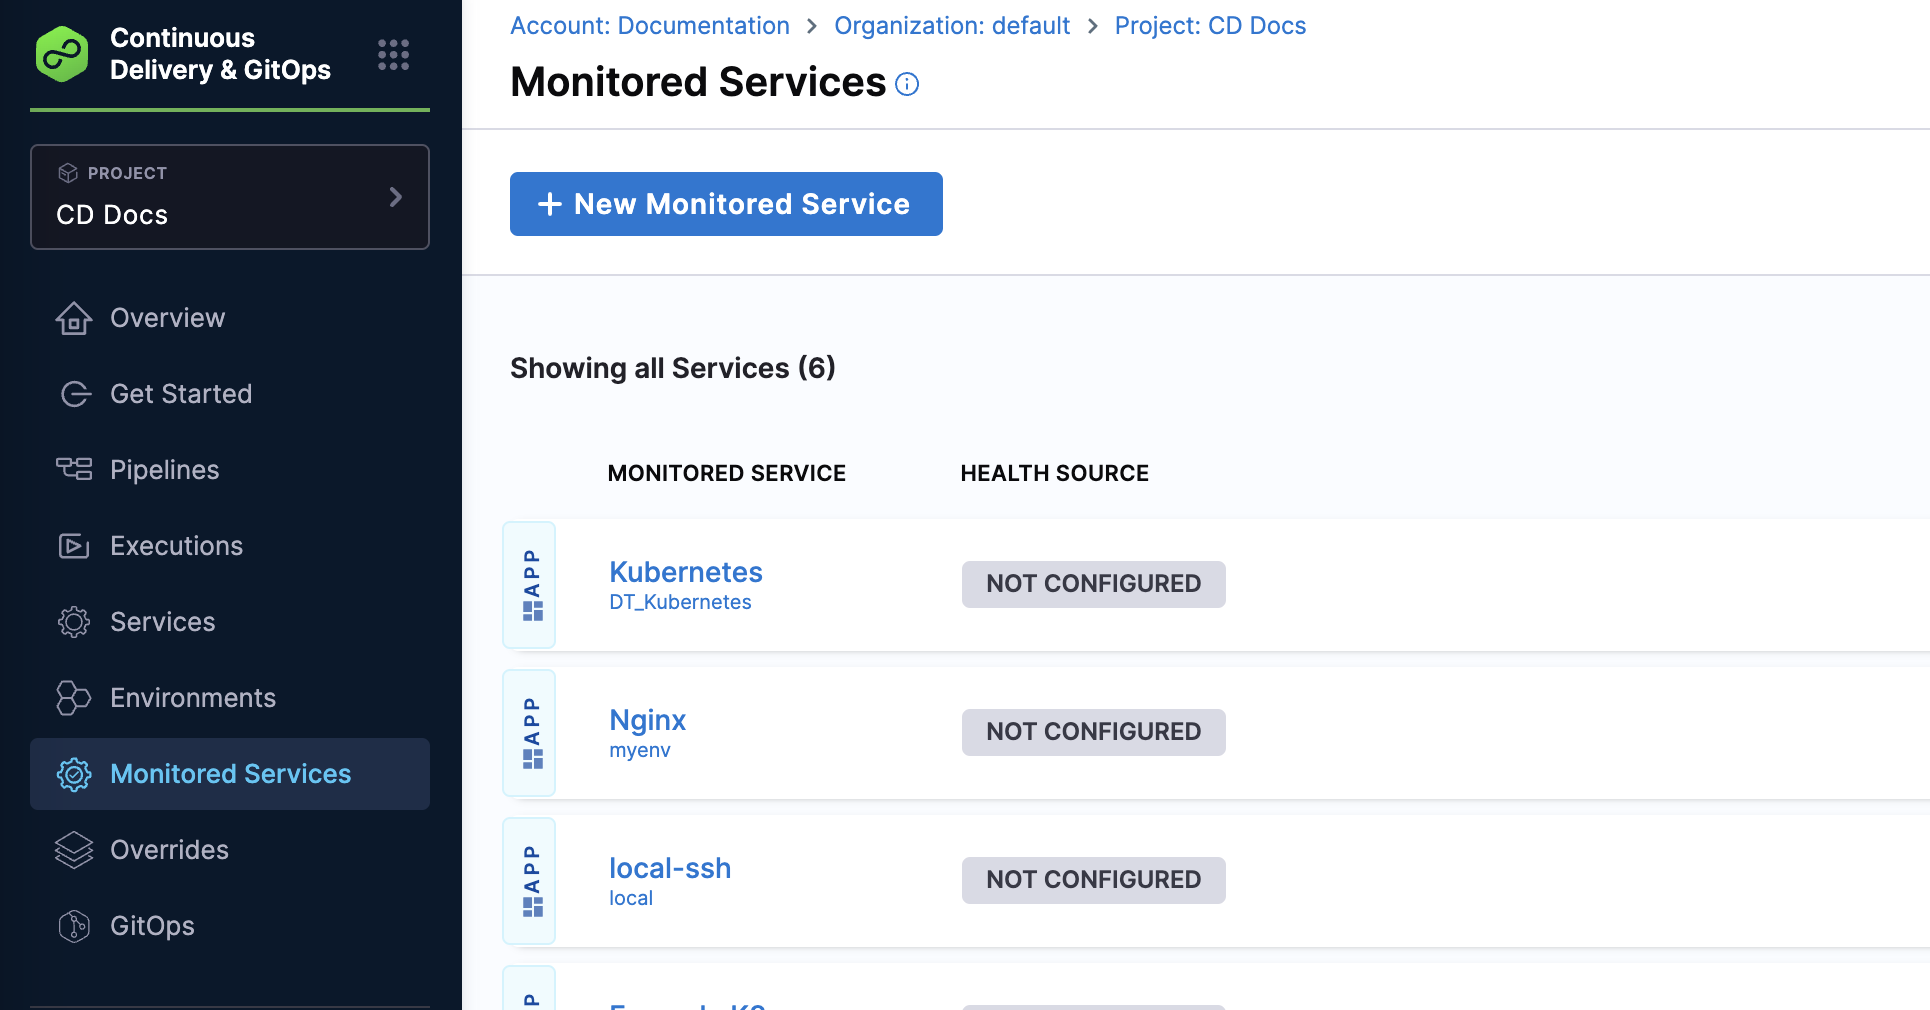 Navigate to new monitored services page